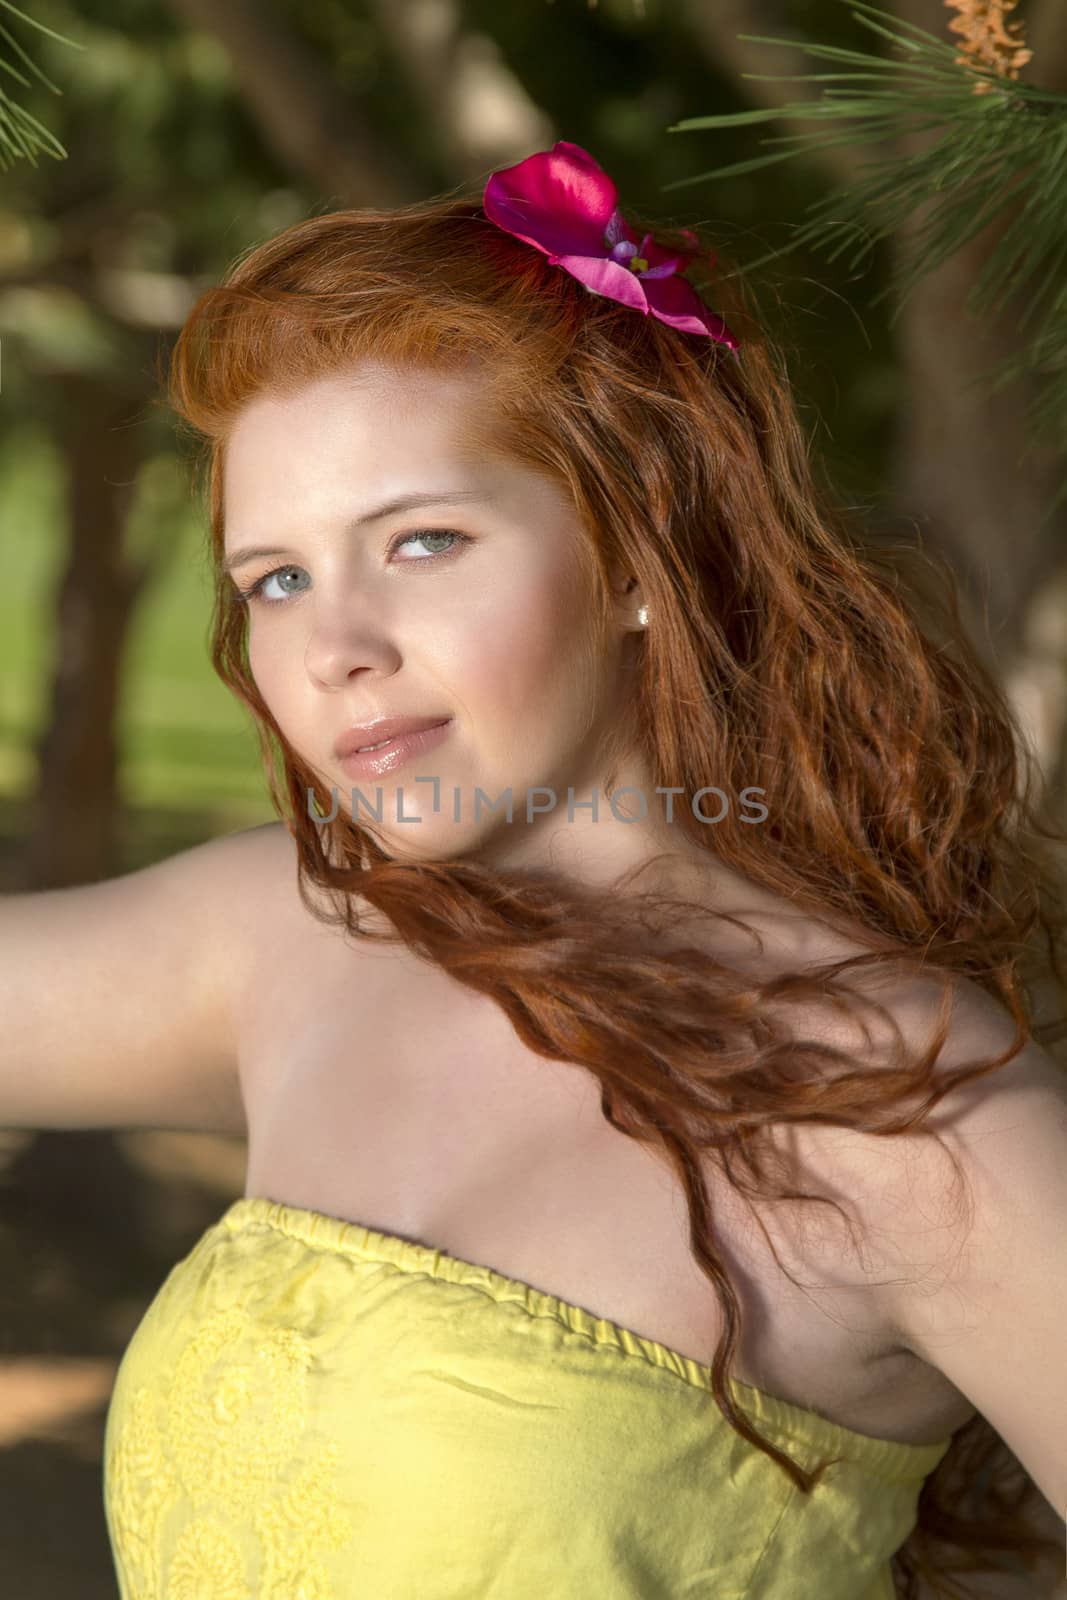 View of a beautiful and happy young woman posing in a garden